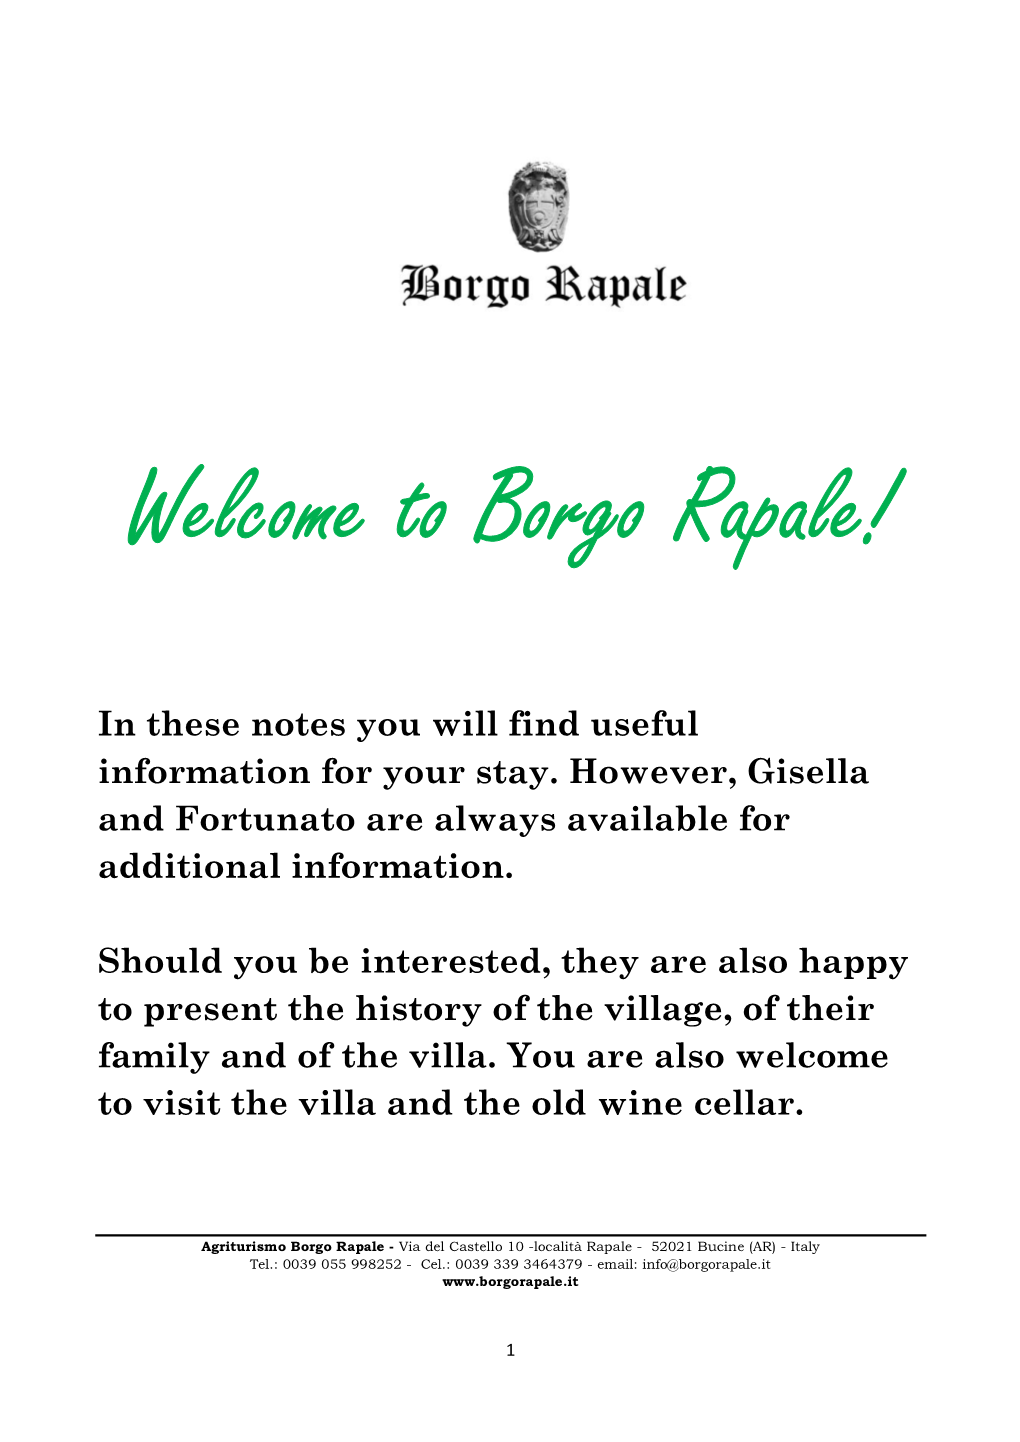 Welcome to Borgo Rapale!